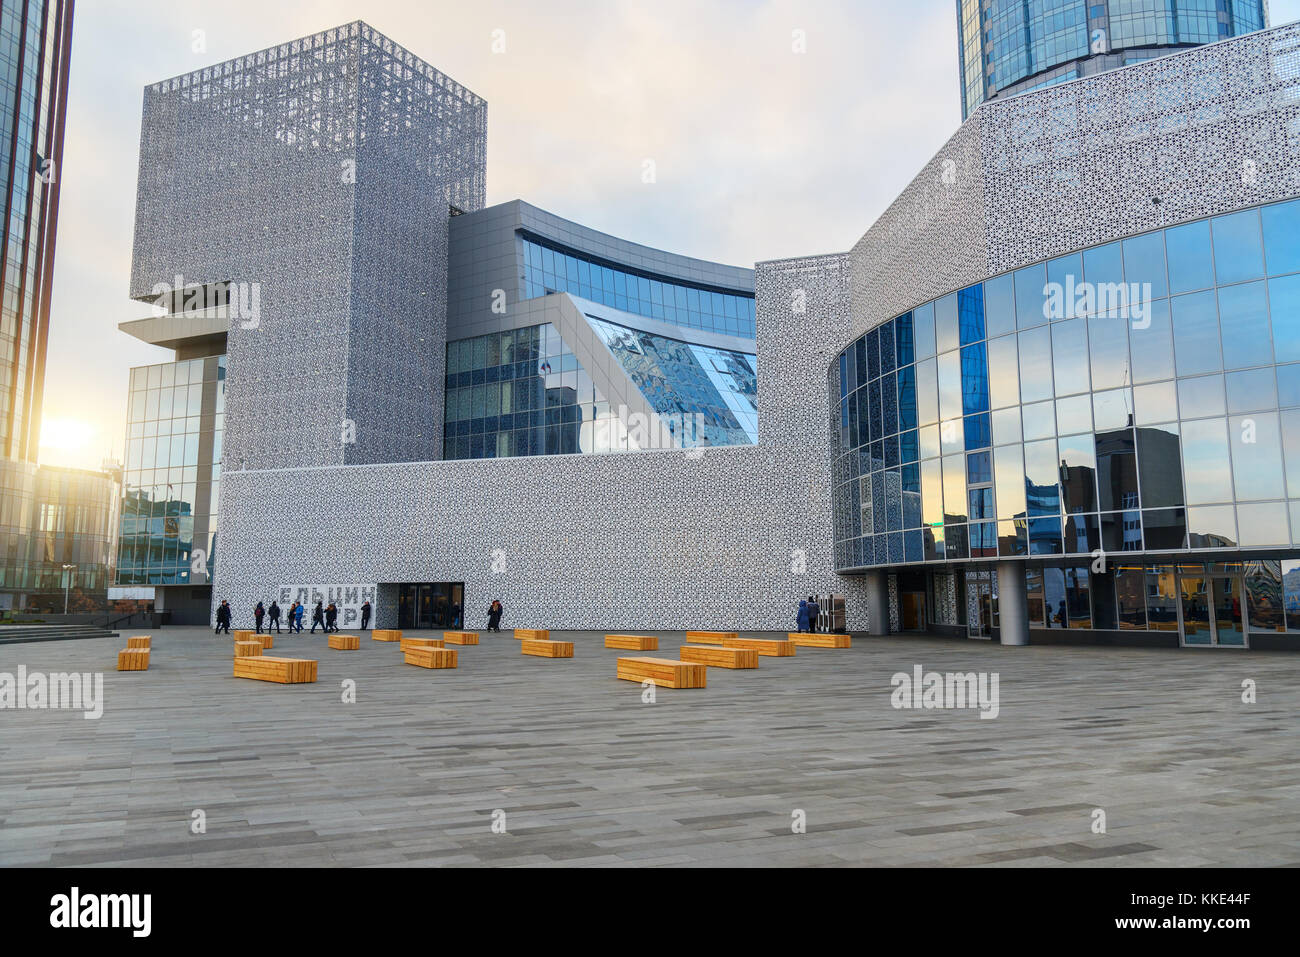 Yekaterinburg, Russia - 11 November, 2017: Boris Yeltsin Presidential Center is social, cultural and educational center. It was open in 2015 Stock Photo